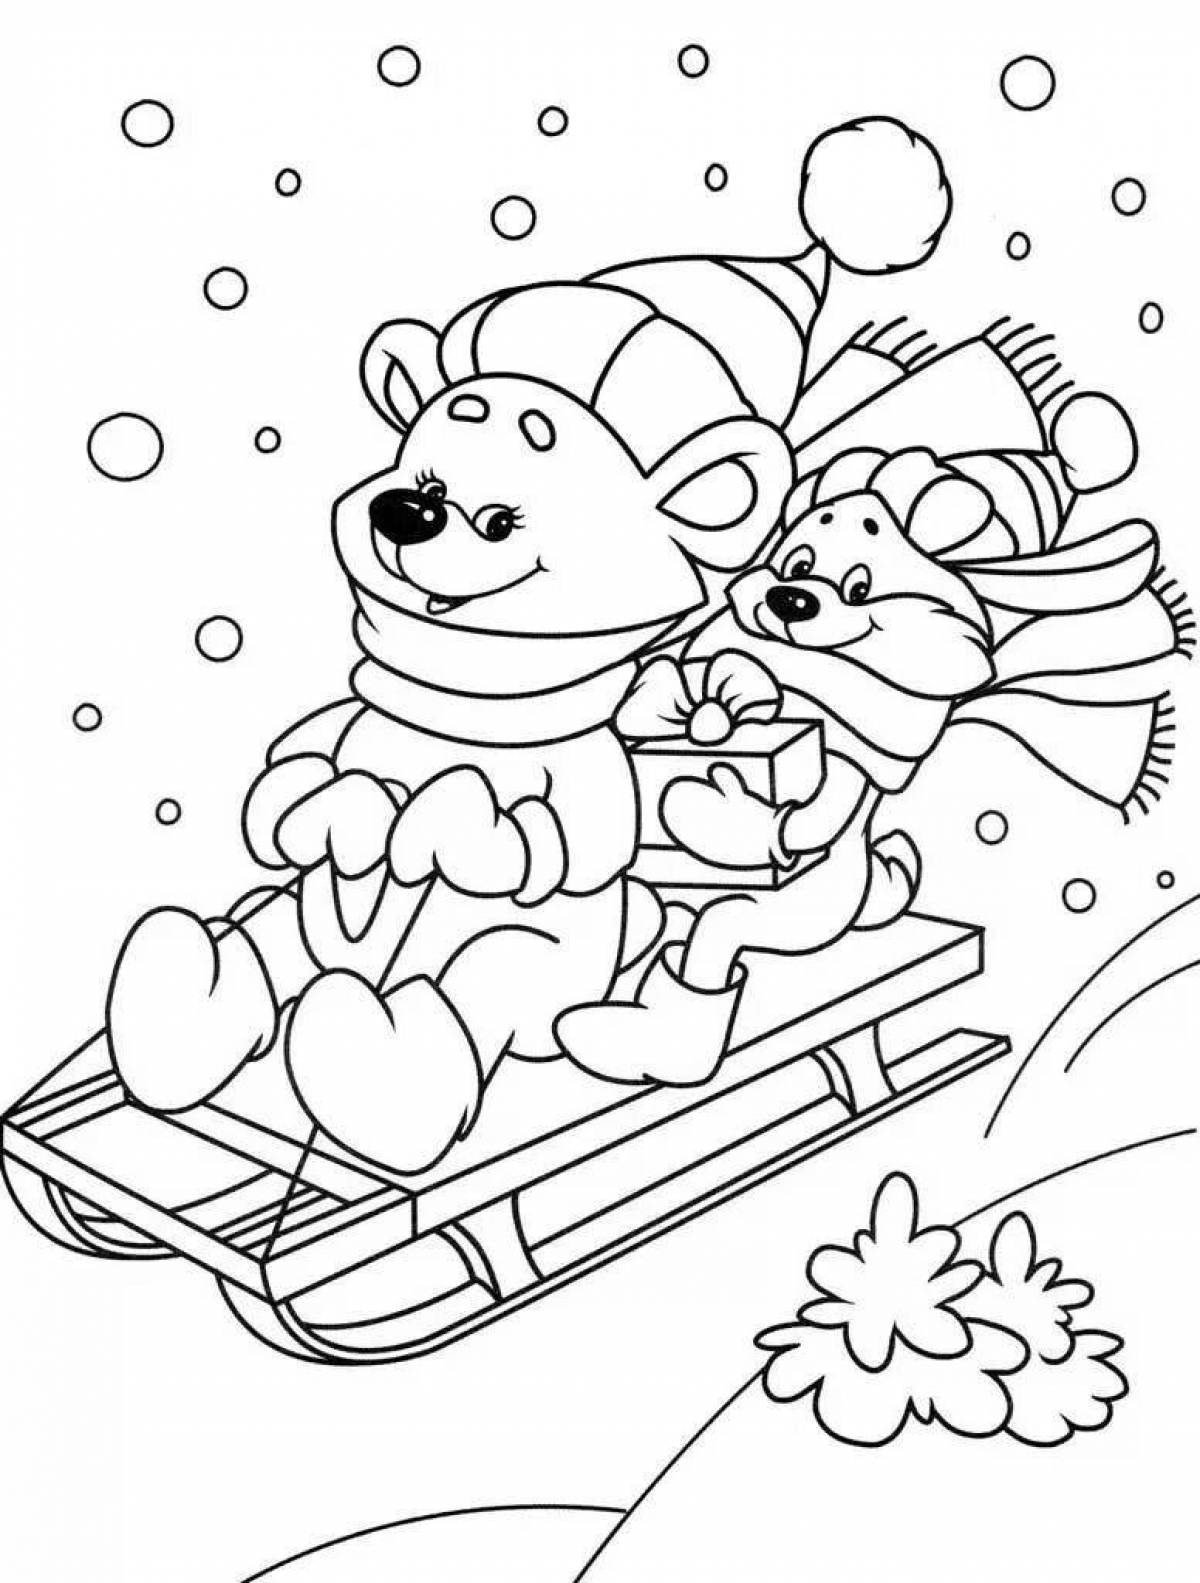 Live winter coloring book for children 3-4 years old